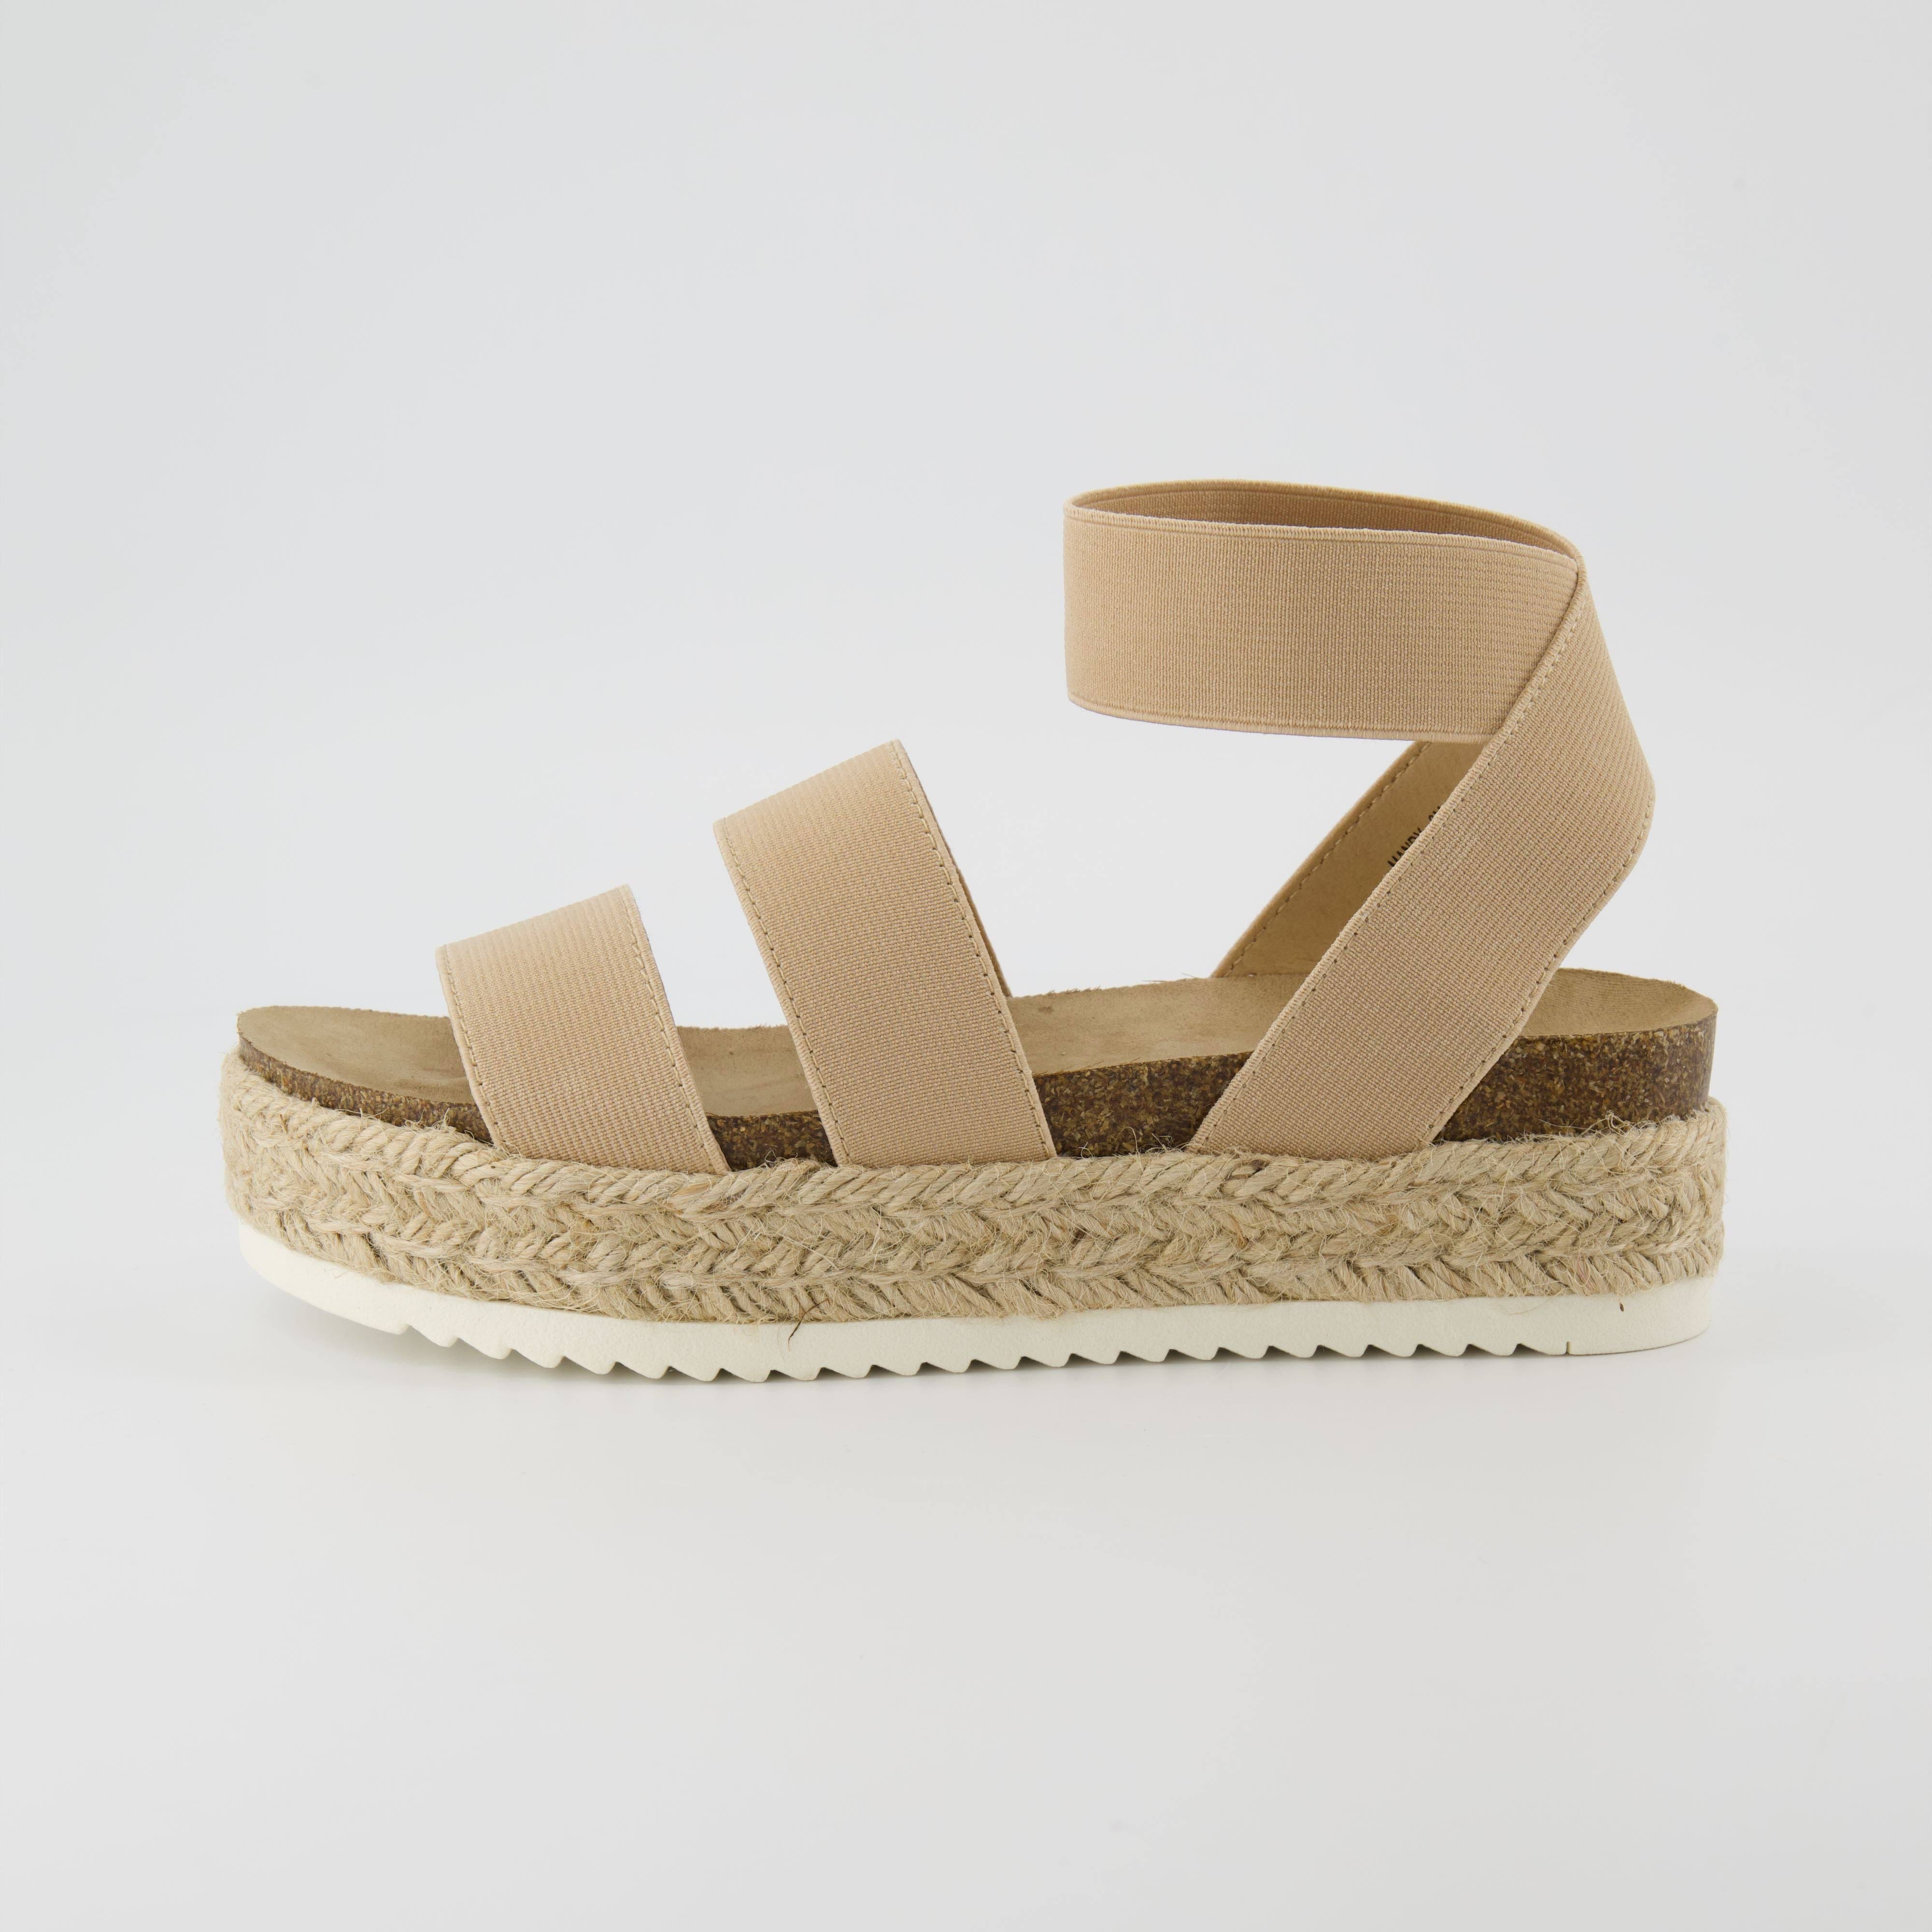 Comfortable Nude Sandals for Women | Image